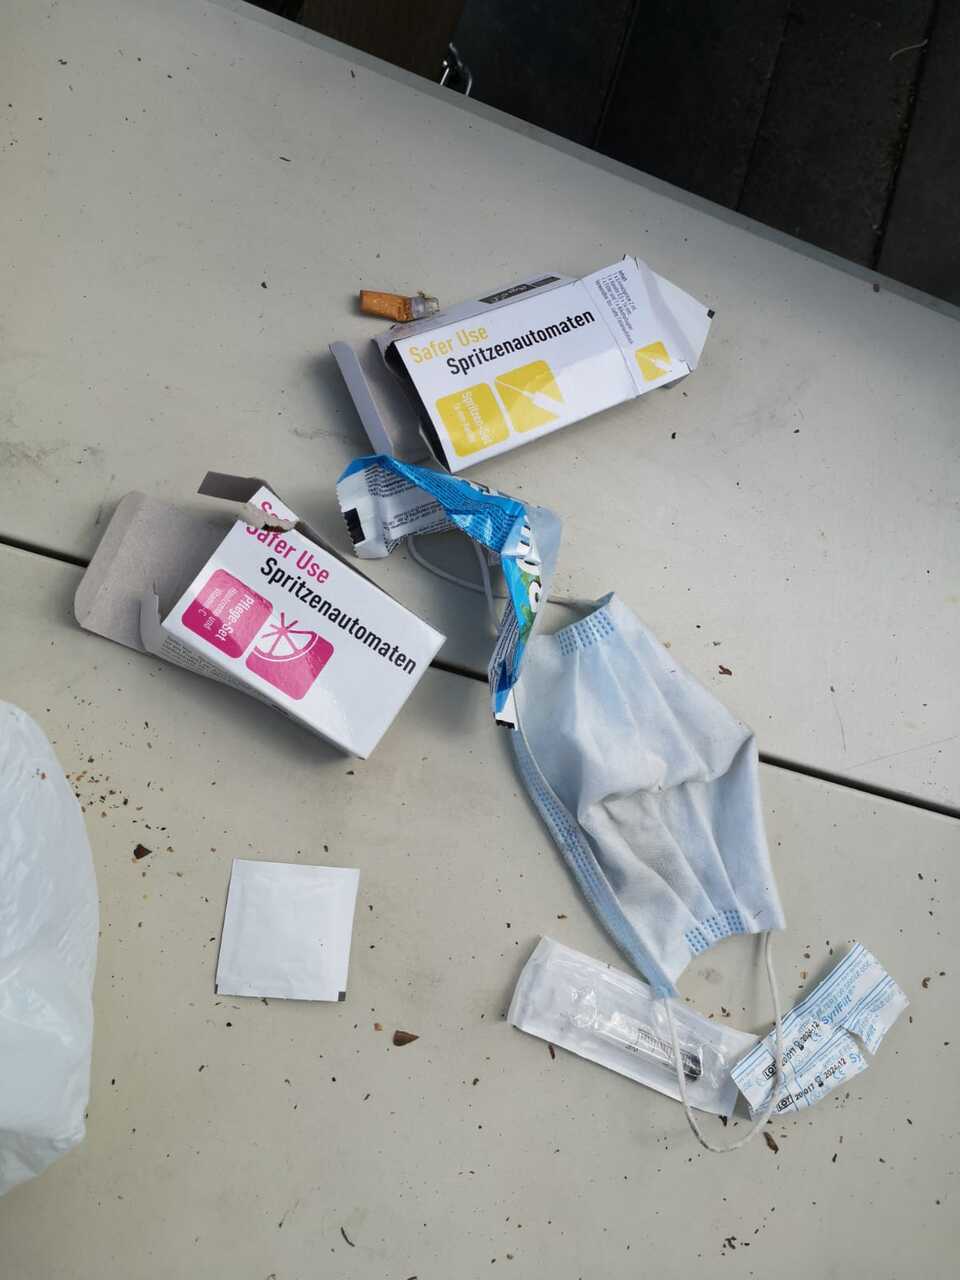 Syringe packaging and discarded mask